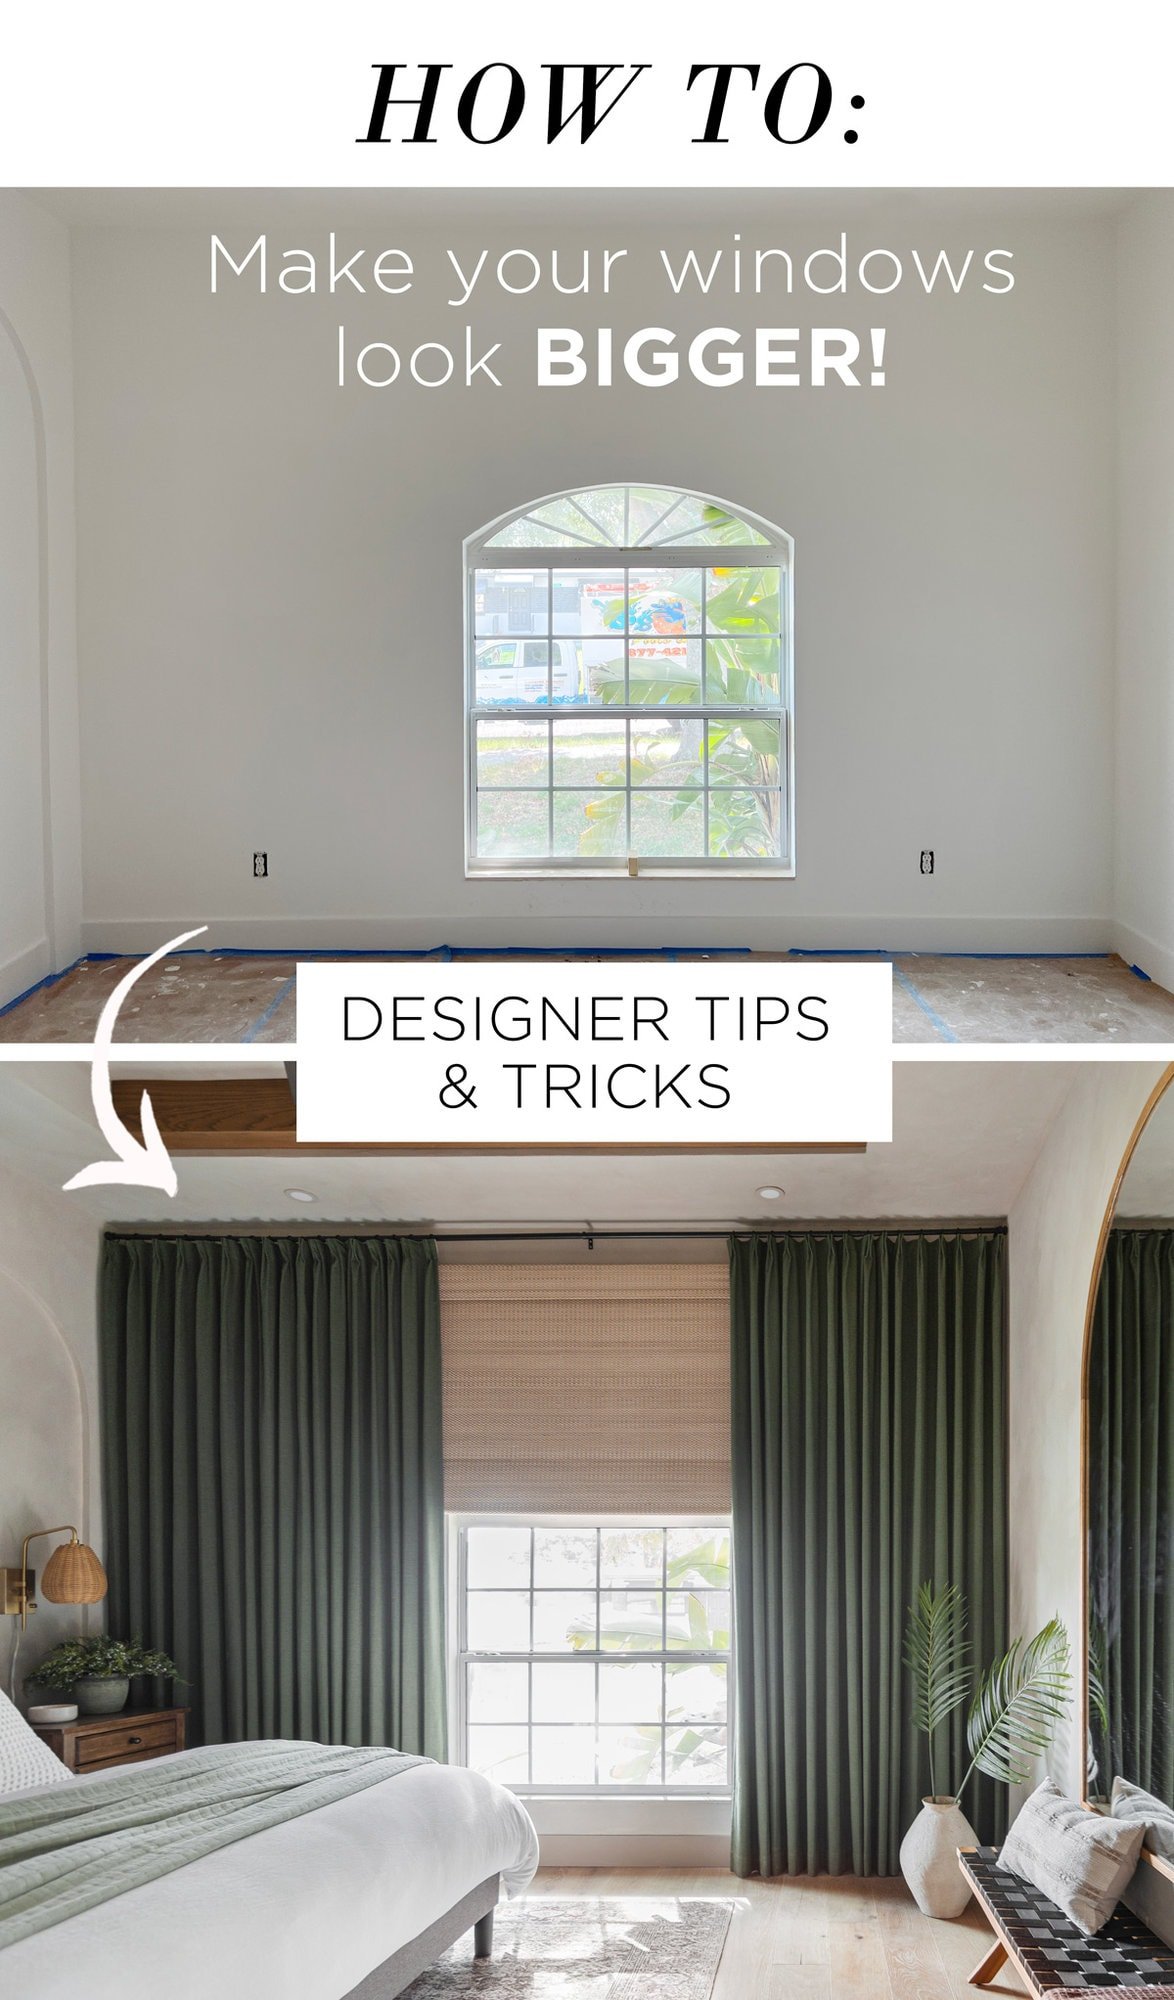 How to make your windows look bigger. Designer tips and tricks